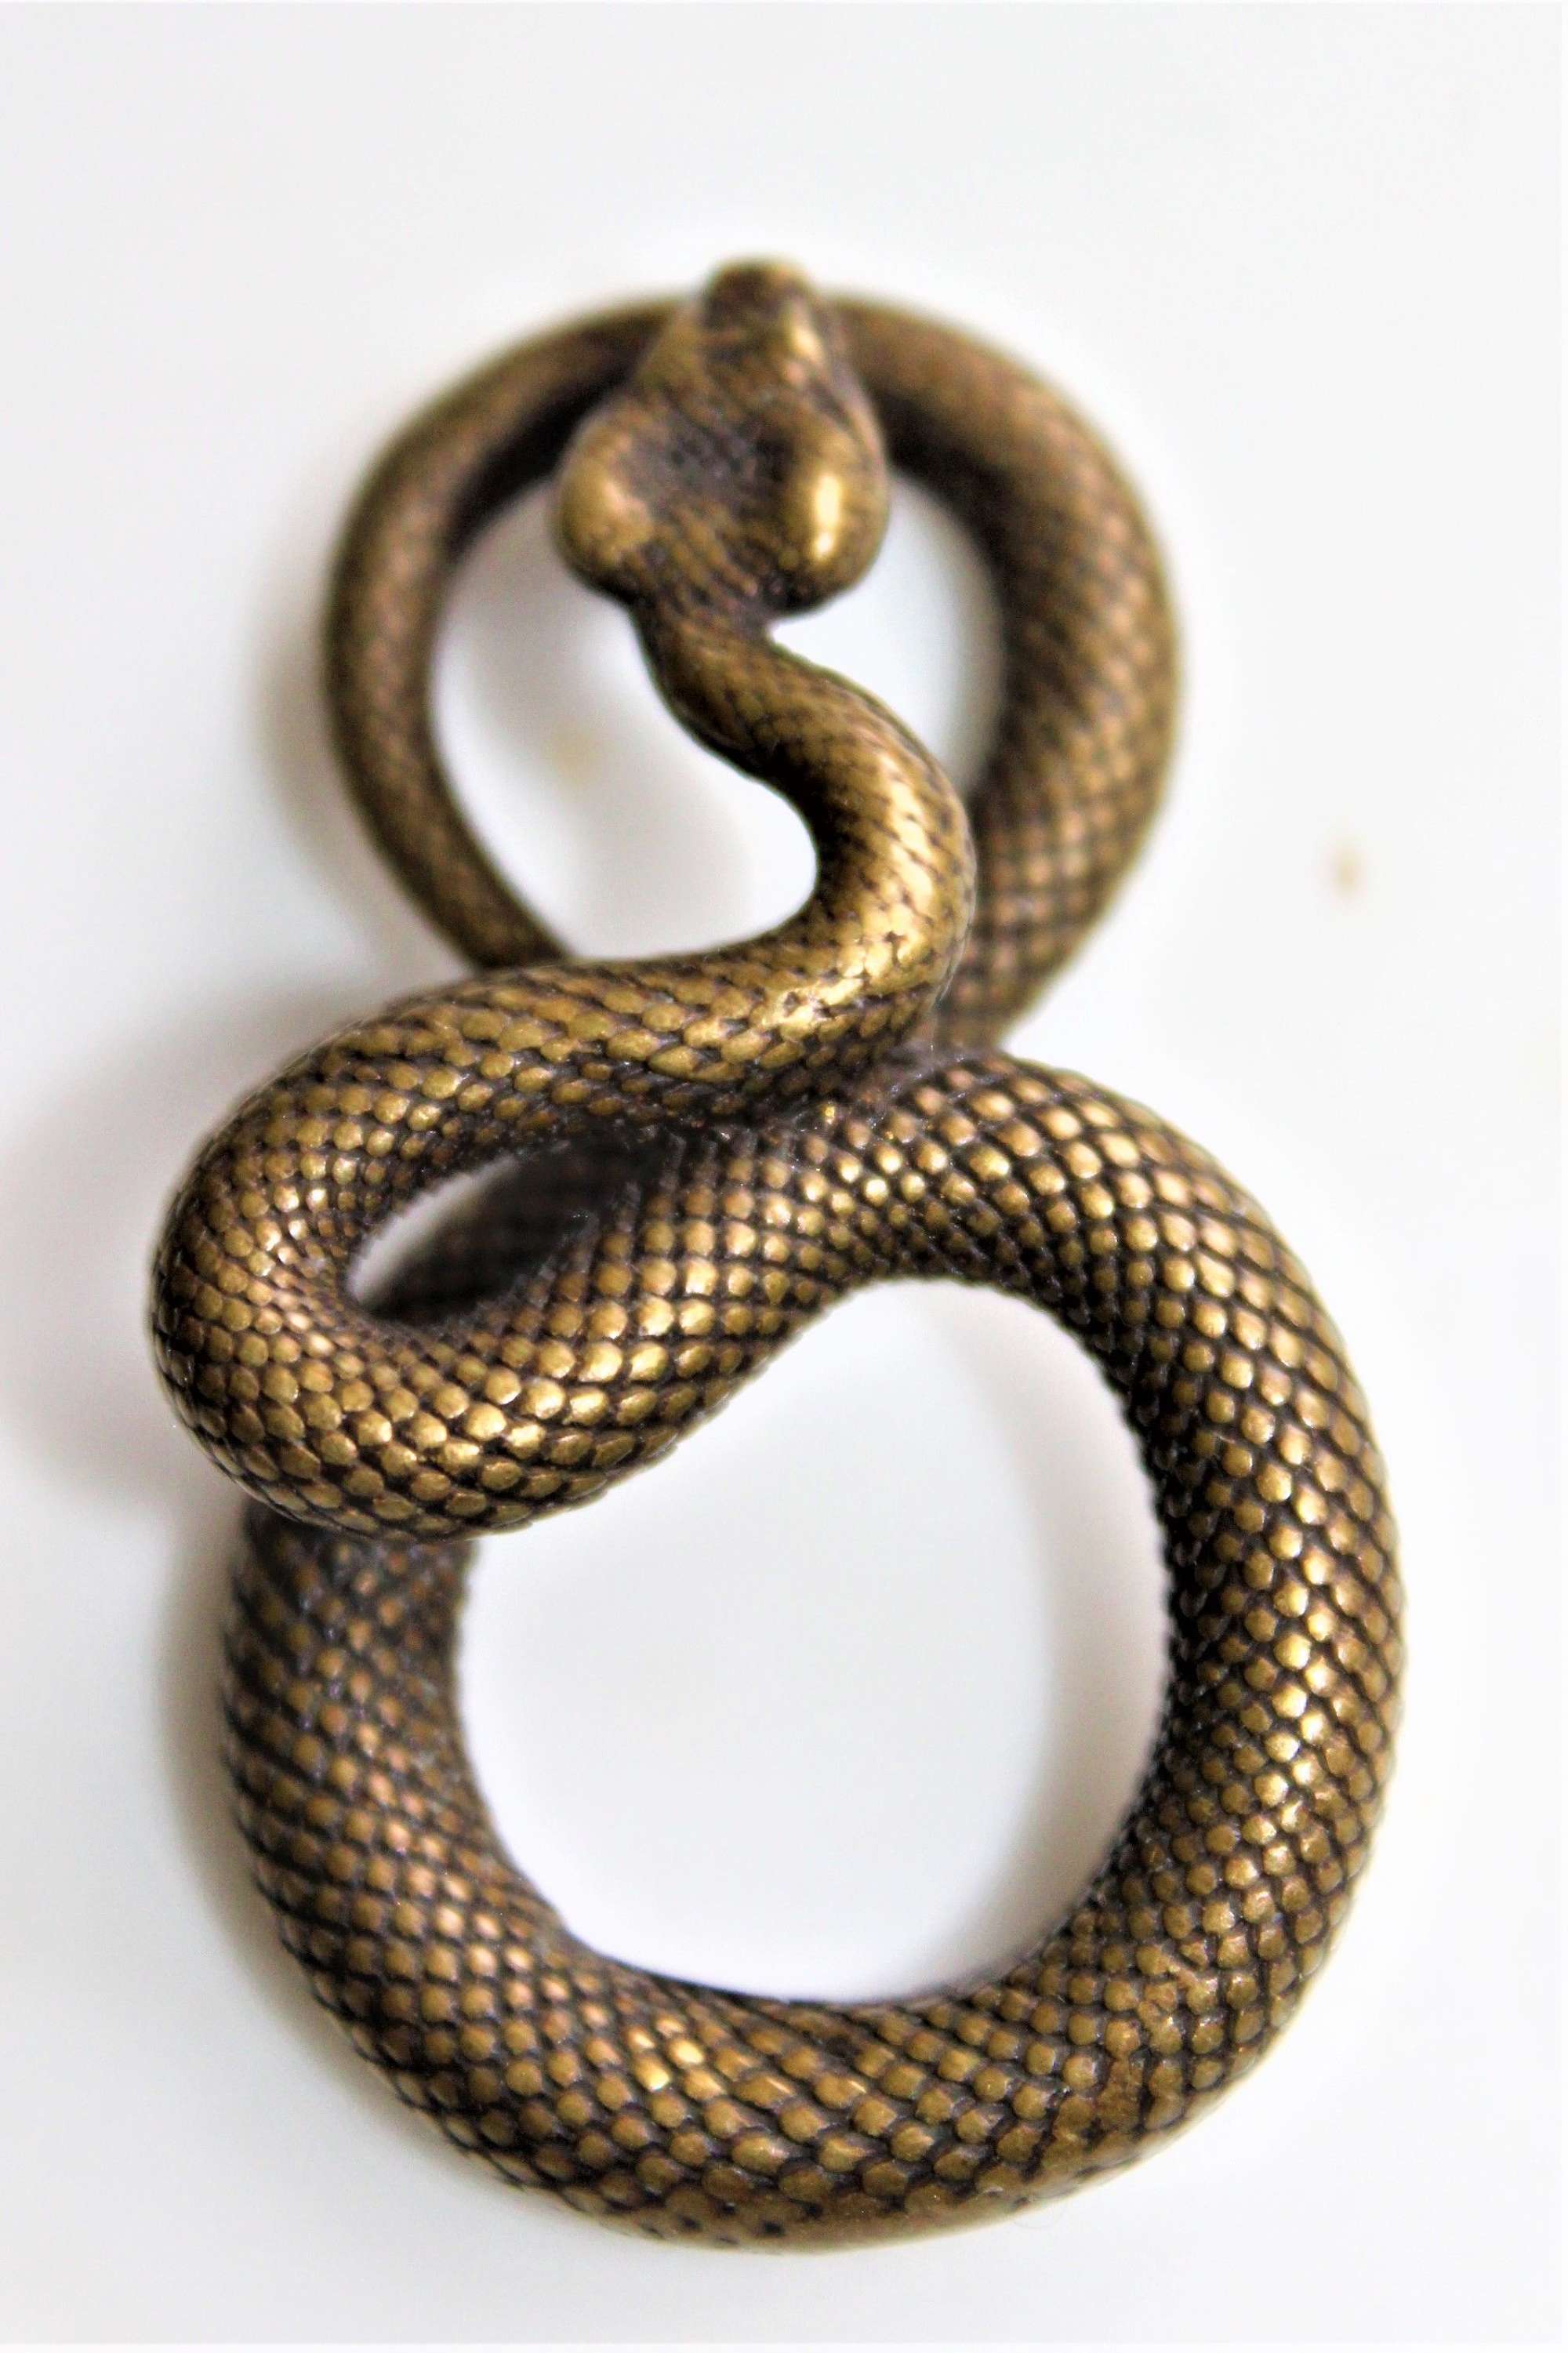 A Small Well Defined Bronze Pendant Of A Coiled Snake